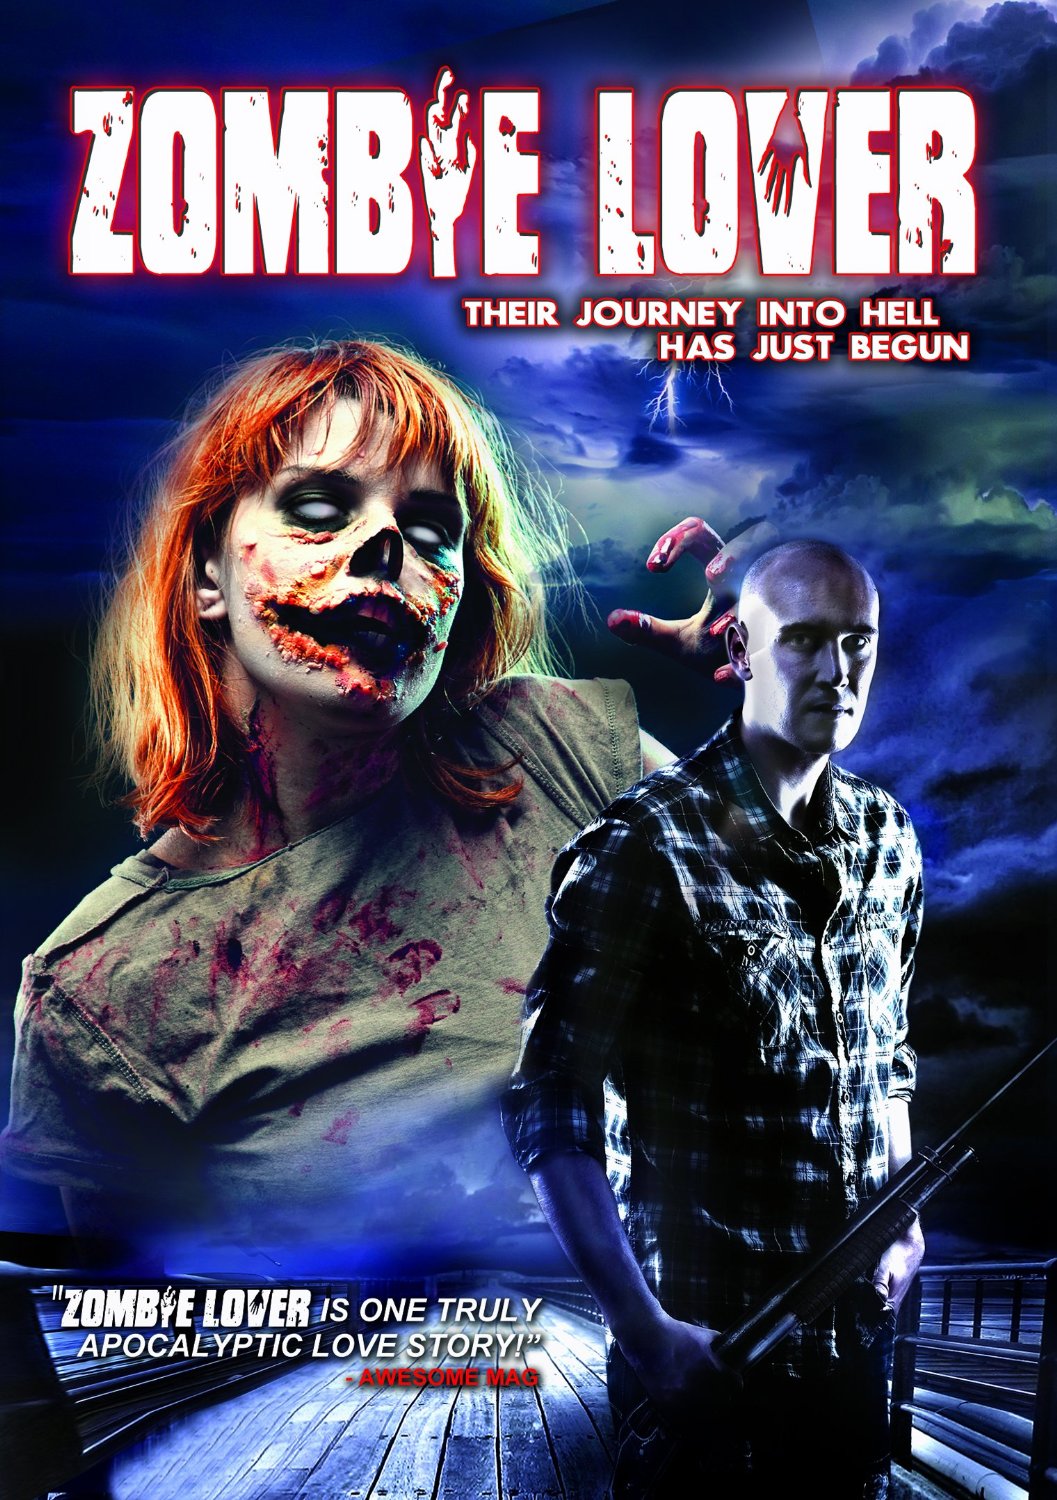 ZOMBIE LOVER: Starring Ryan Hunter as Quaid Hess, Lianne Robertson as Stacey Gallagher, Max Fellows as Michael Gallagher, Eileen Daly as Ilsa and Jason Impey as Leon.